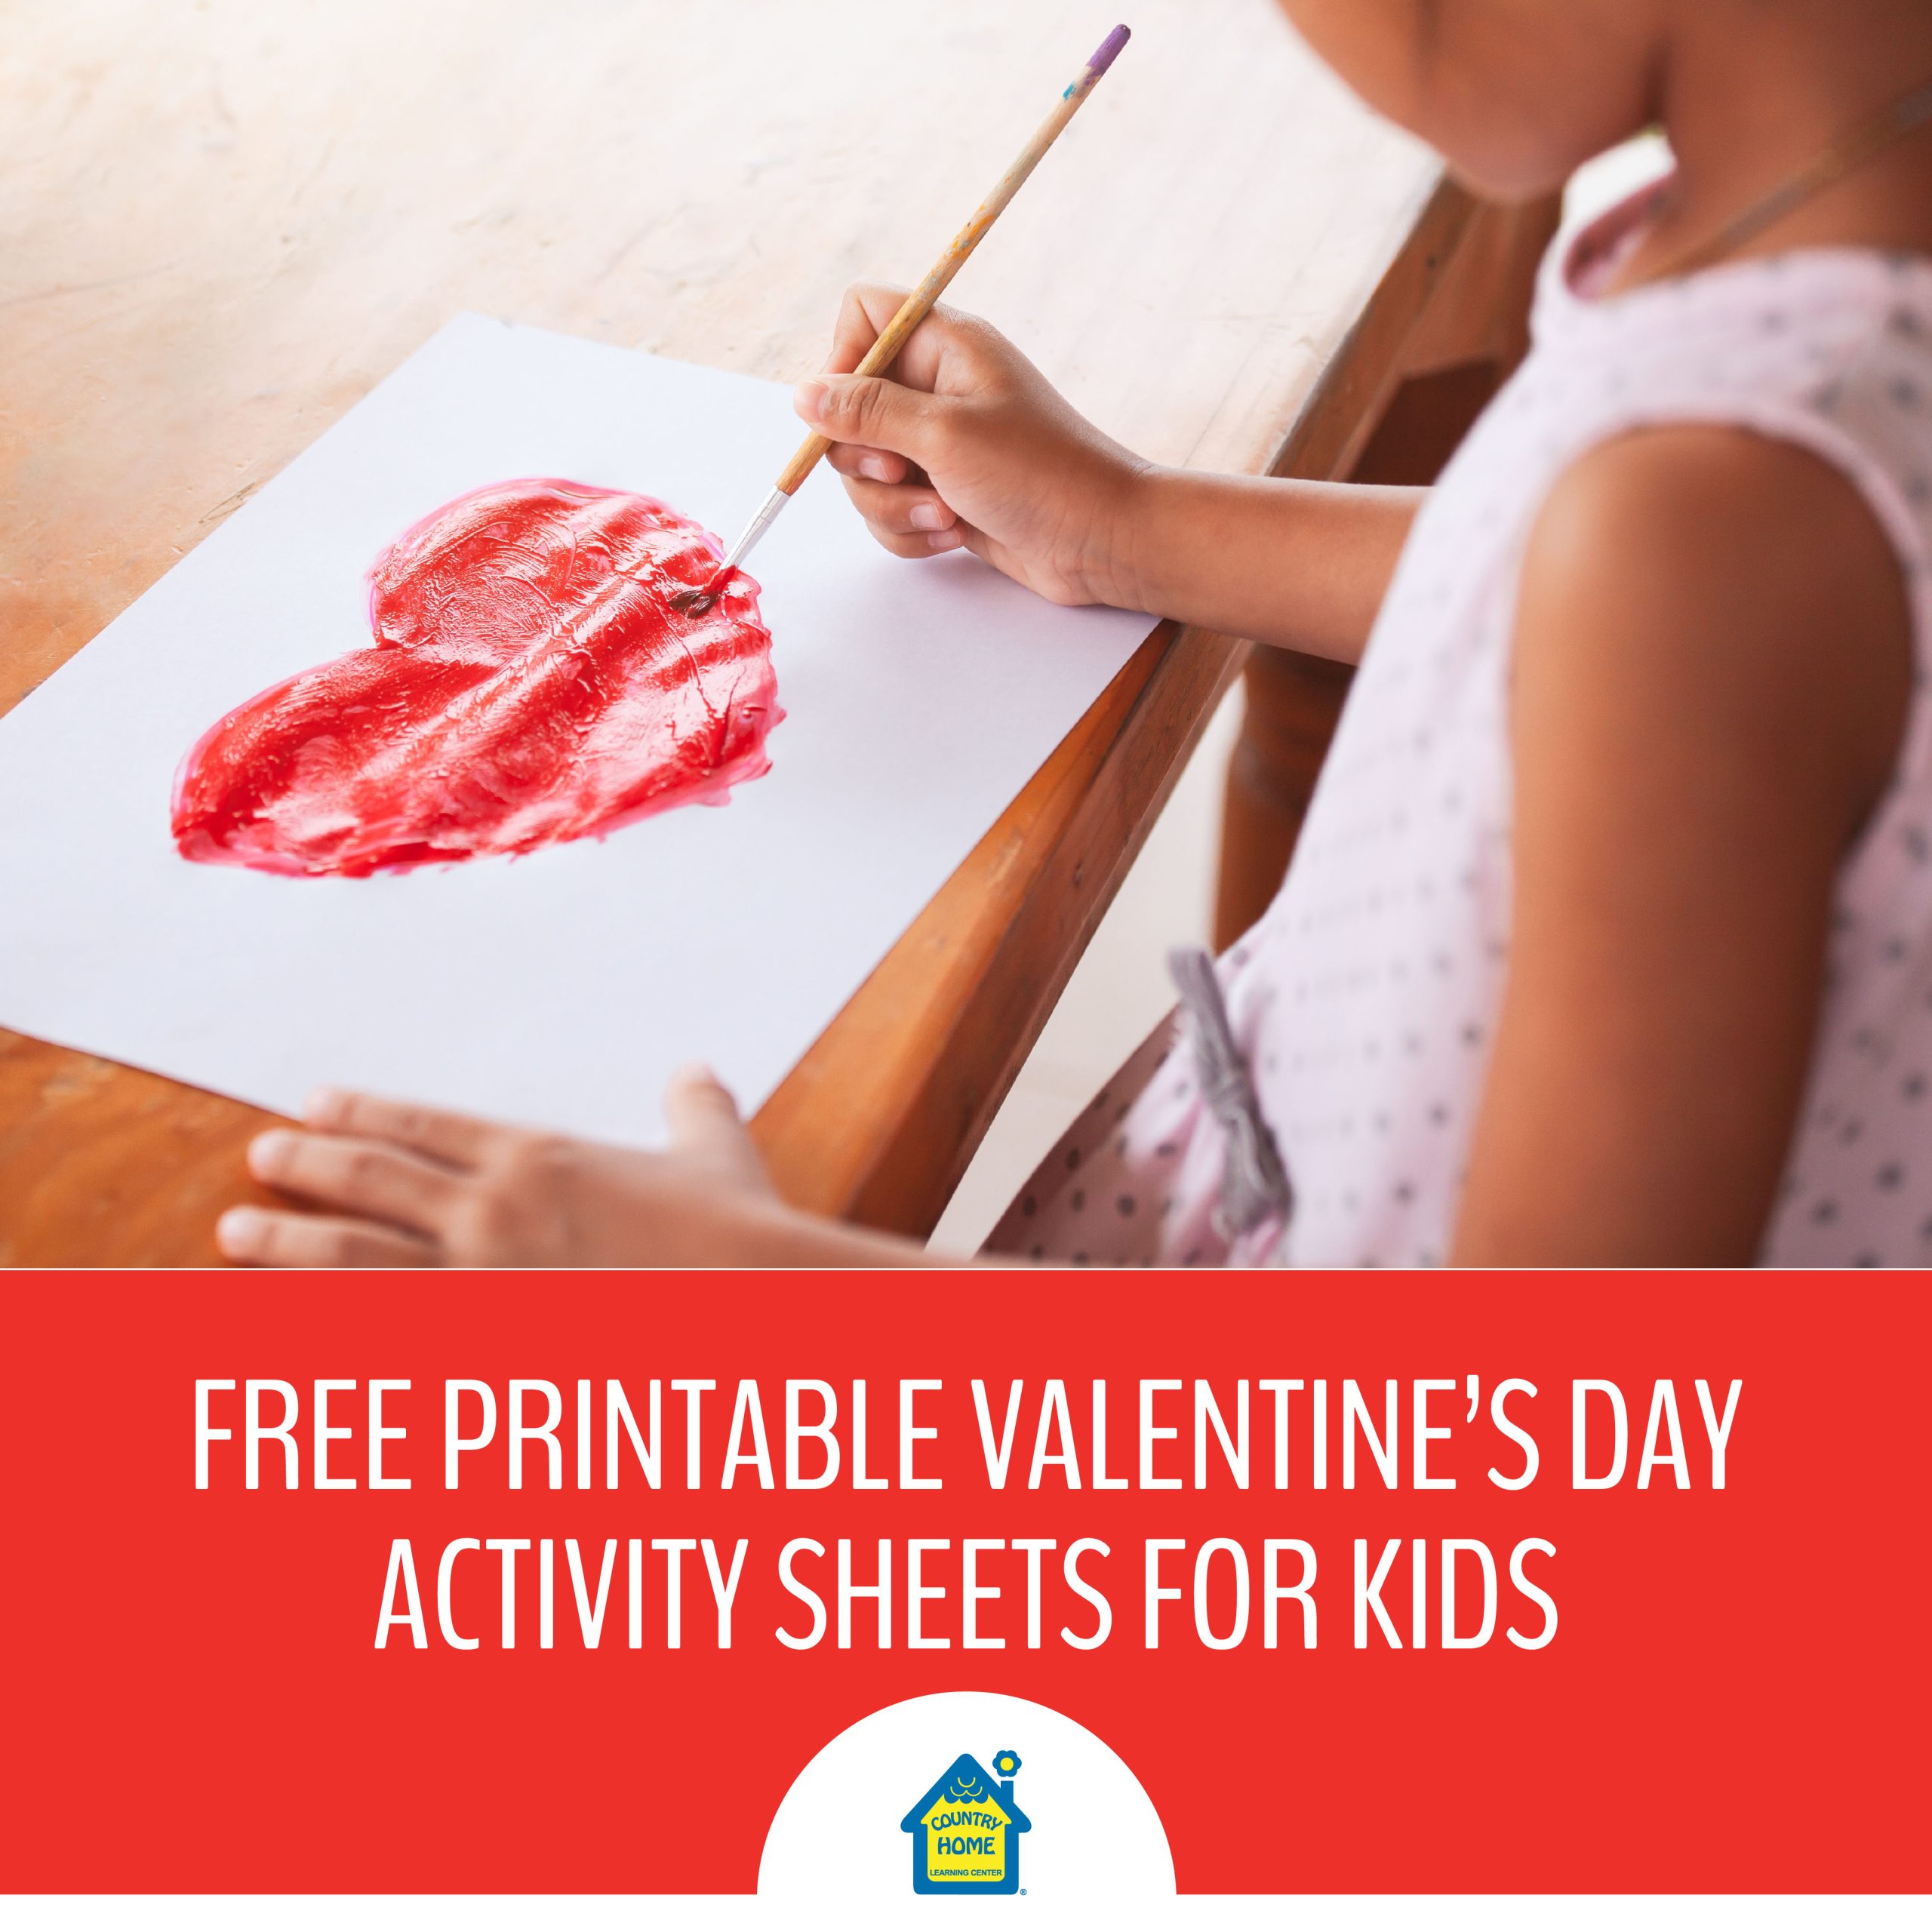 free-printable-valentine-s-day-activity-sheets-for-kids-chlc-blog